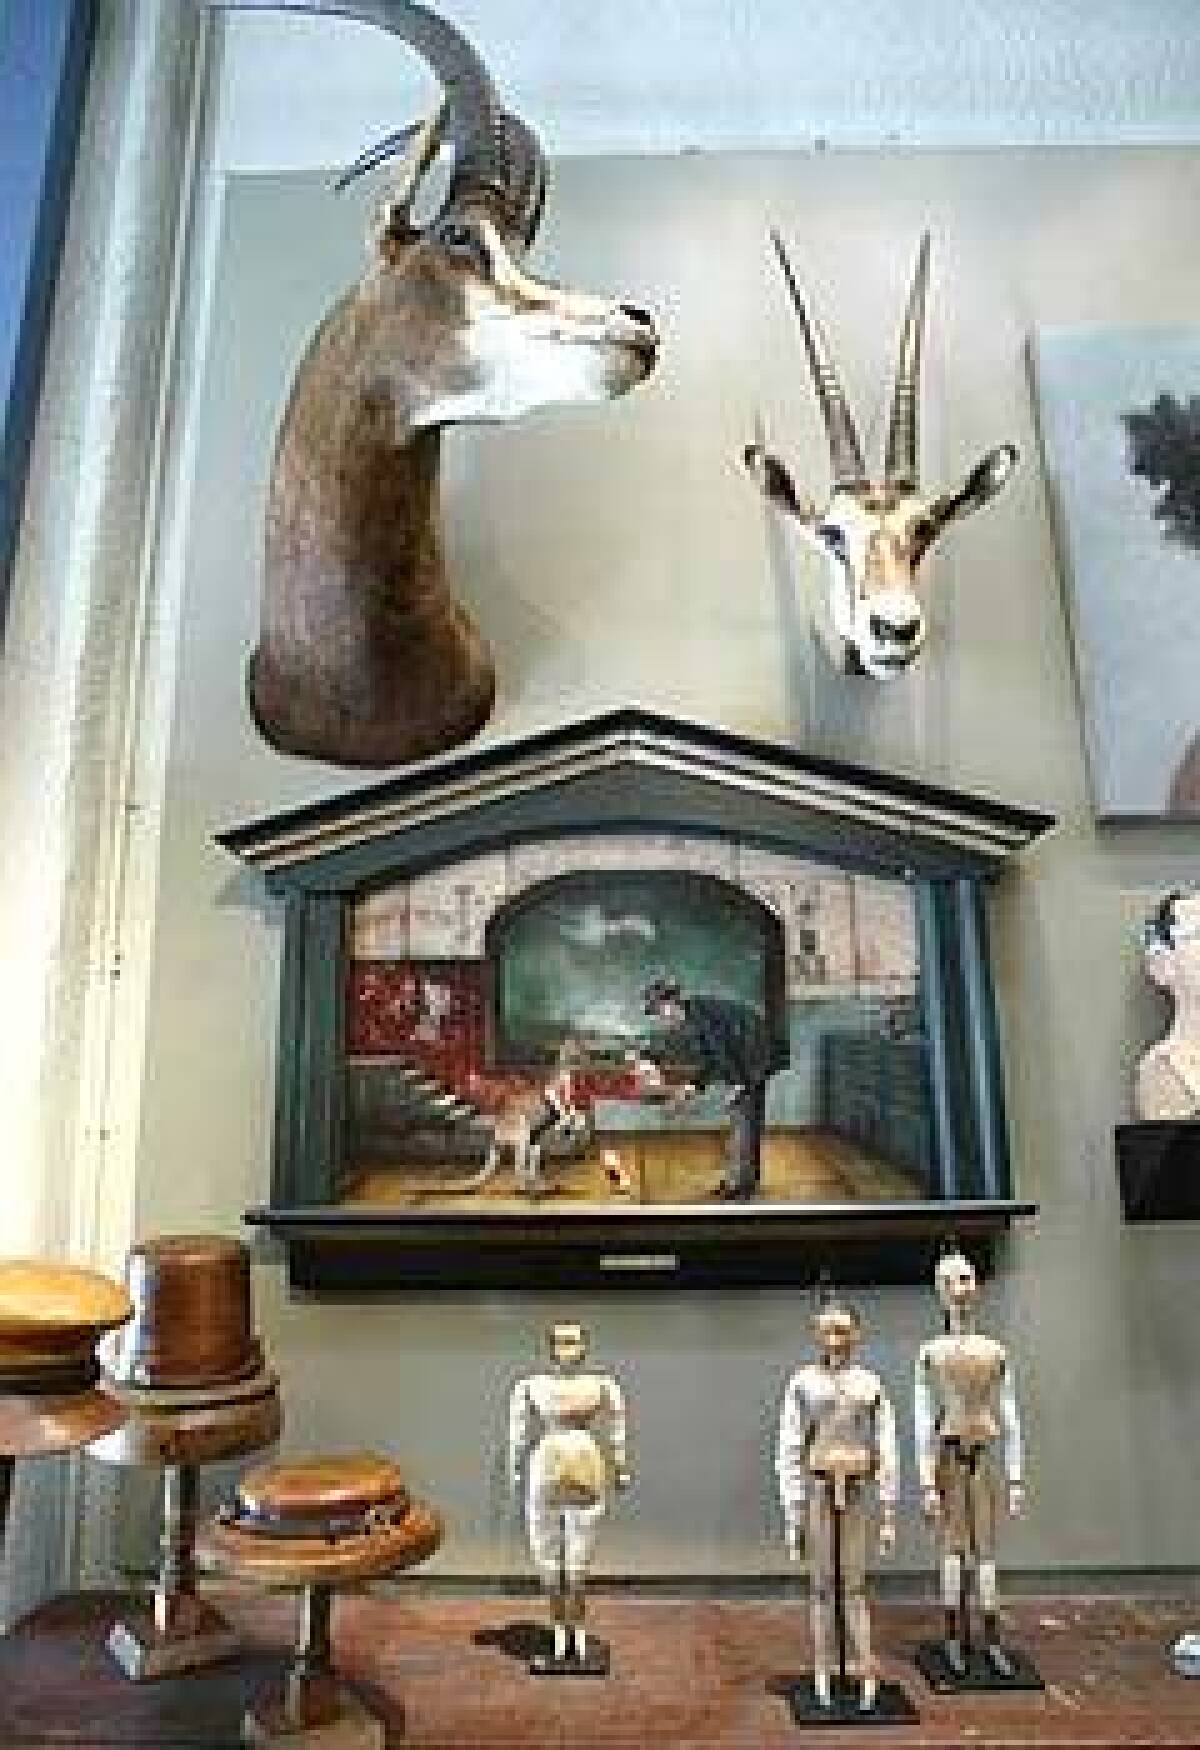 A meticulously designed grouping contains elements of taxidermy, woodworking and painting at Obsolete, a Venice art space that is part gallery, part museum and part store.